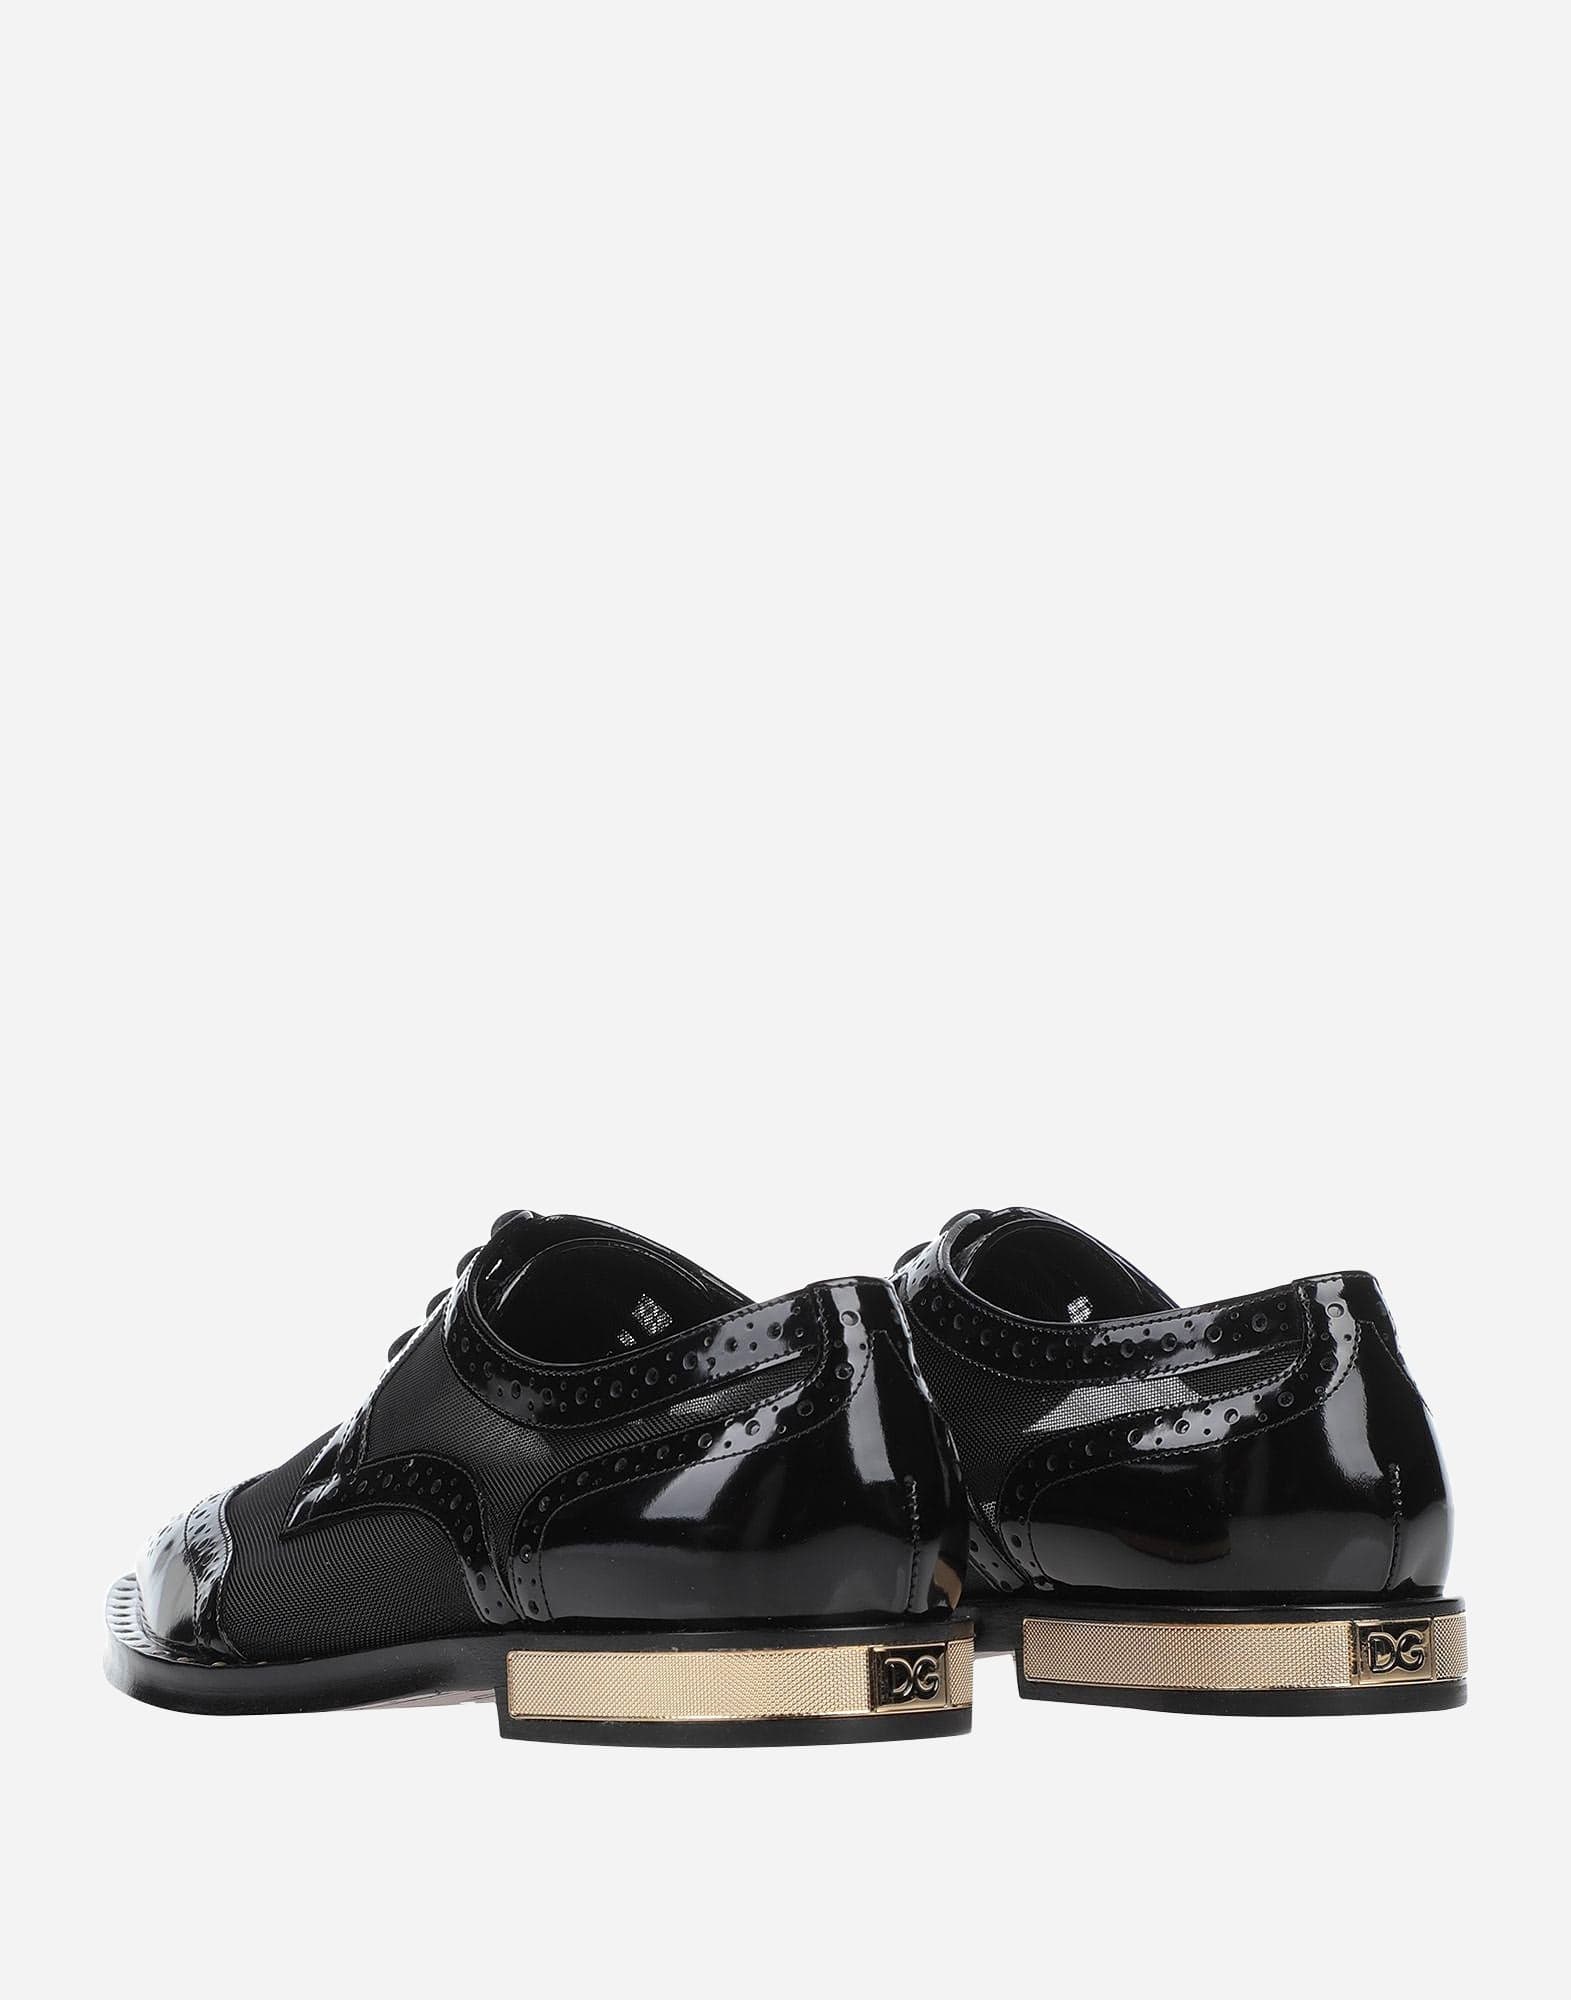 Dolce & Gabbana Leather Brogue Lace-Up Shoes